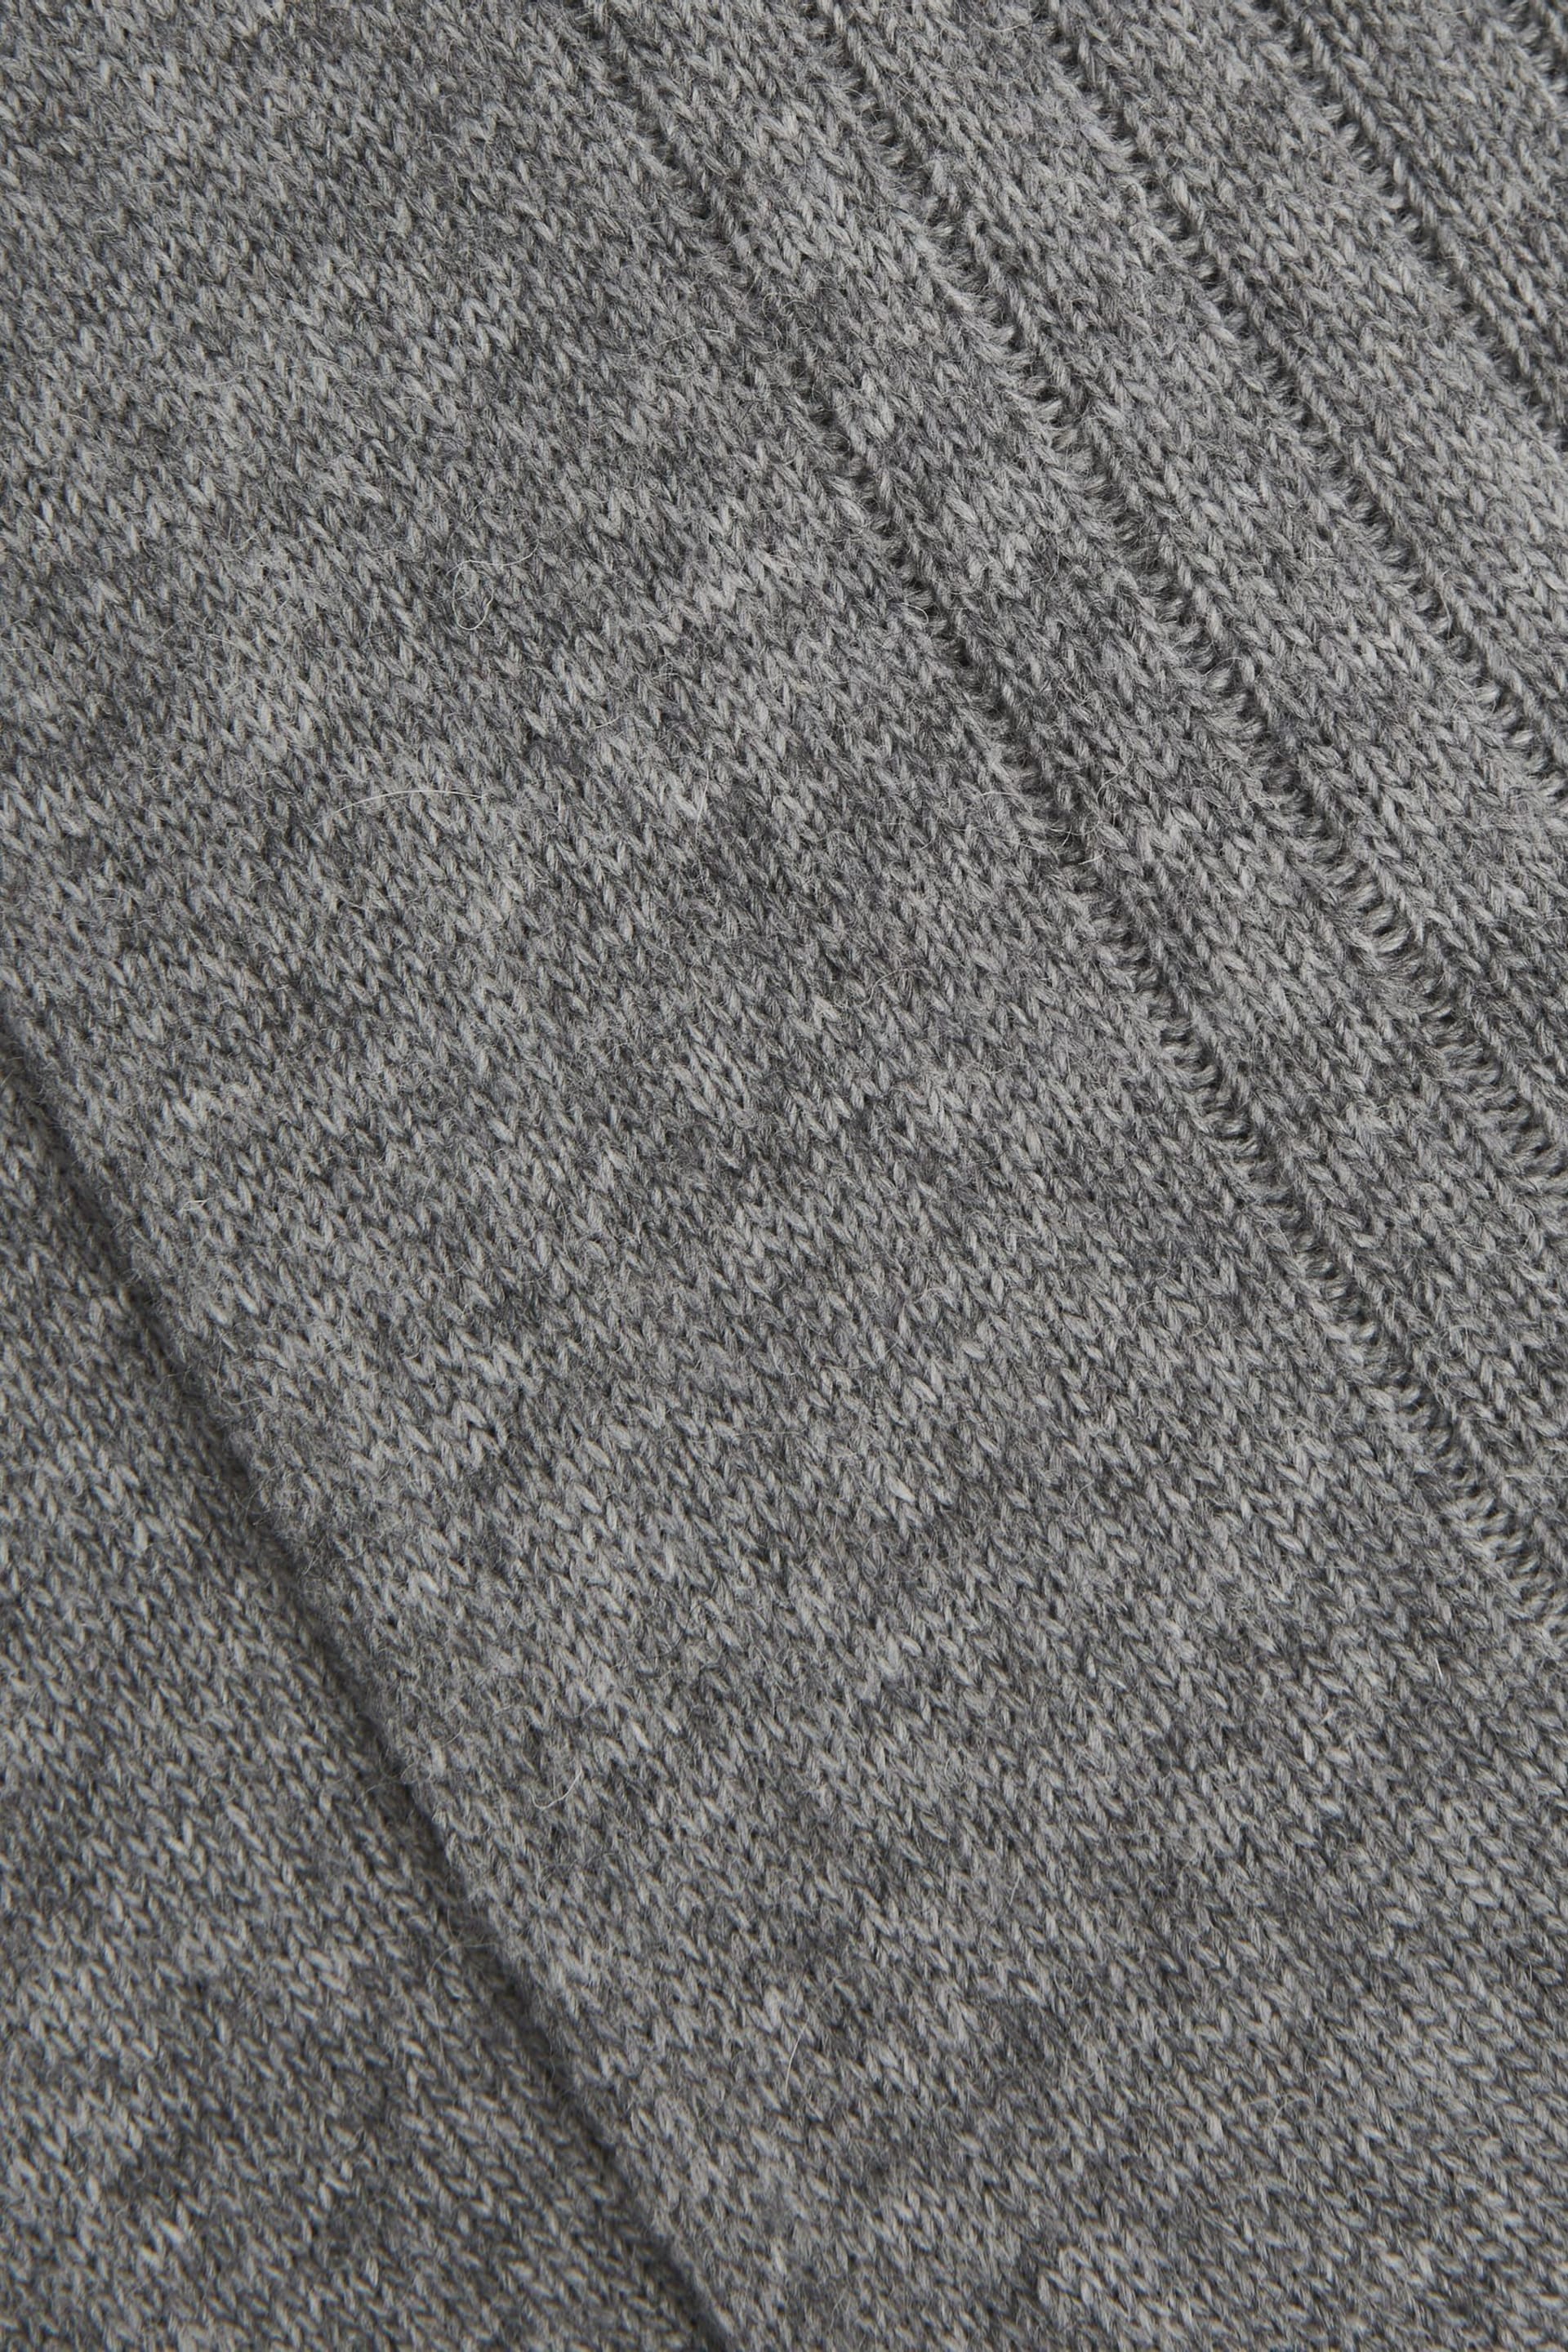 Reiss Soft Grey Cirby Wool-Cashmere Blend Ribbed Socks - Image 3 of 3